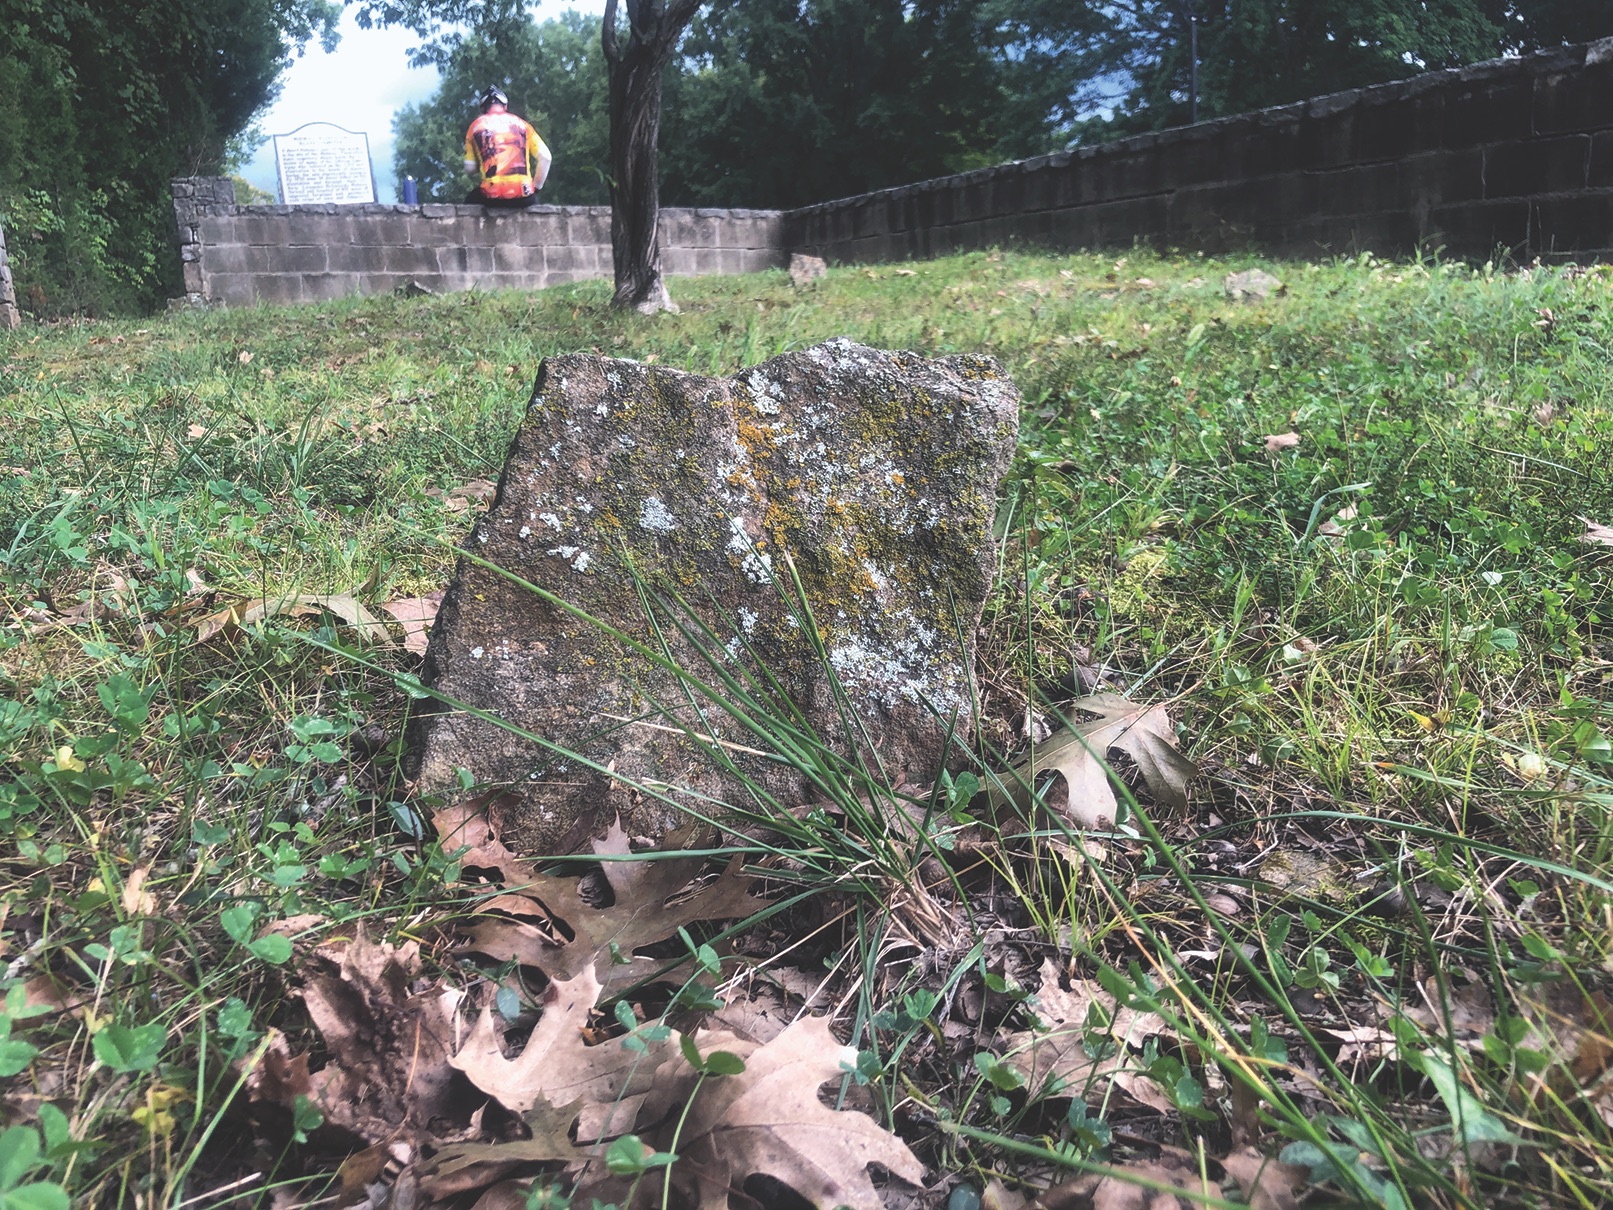 Unlike their master’s ornate gravestone on the grounds of the “Midway” plantation, the slaves’ markers have no inscriptions. Most are stubs of stone, and only a few might be identified from slave records.